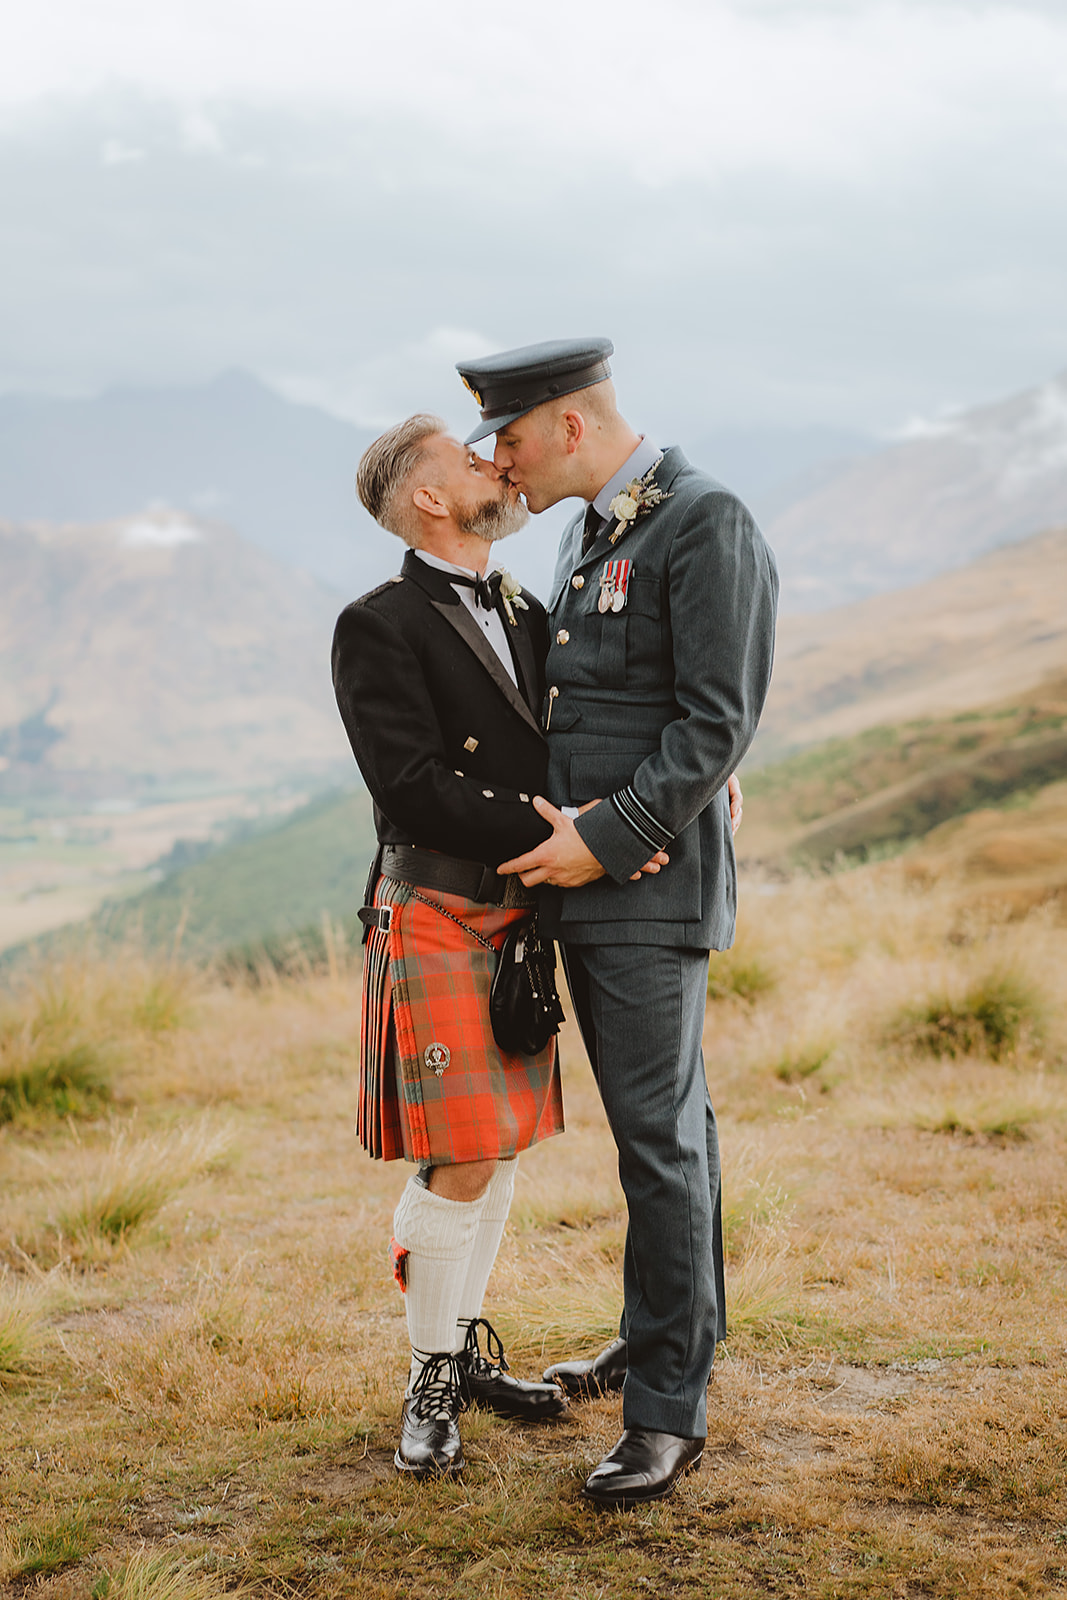 Two grooms kiss at Coronet Peak after their wedding ceremony